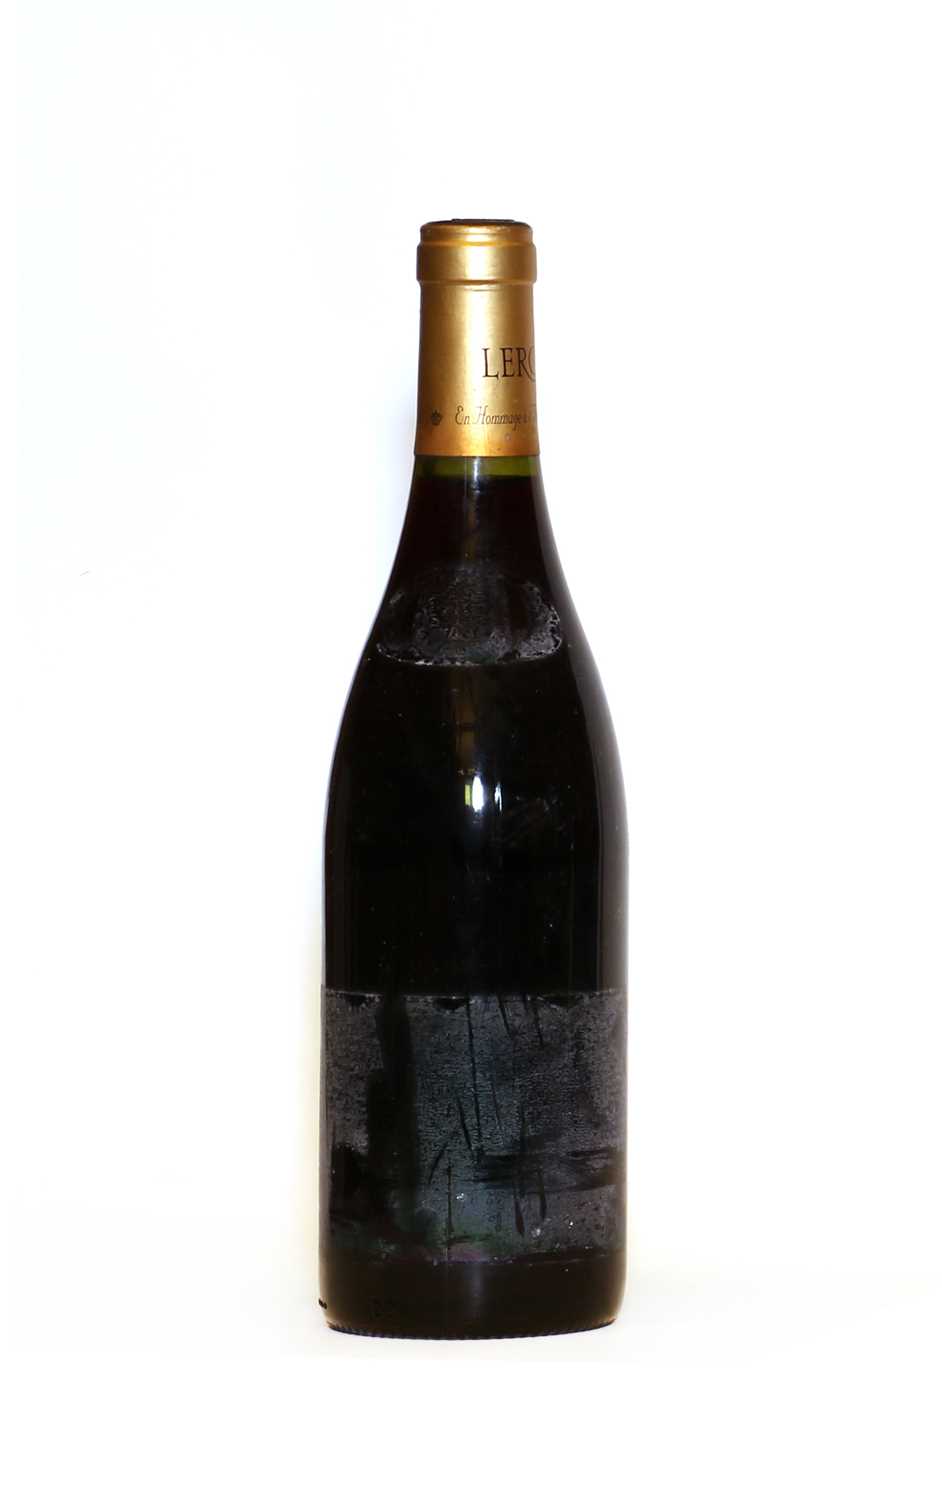 Lot 79 - Bourgogne, Domaine Leroy, Hommage a l’An 2000, missing label, one bottle